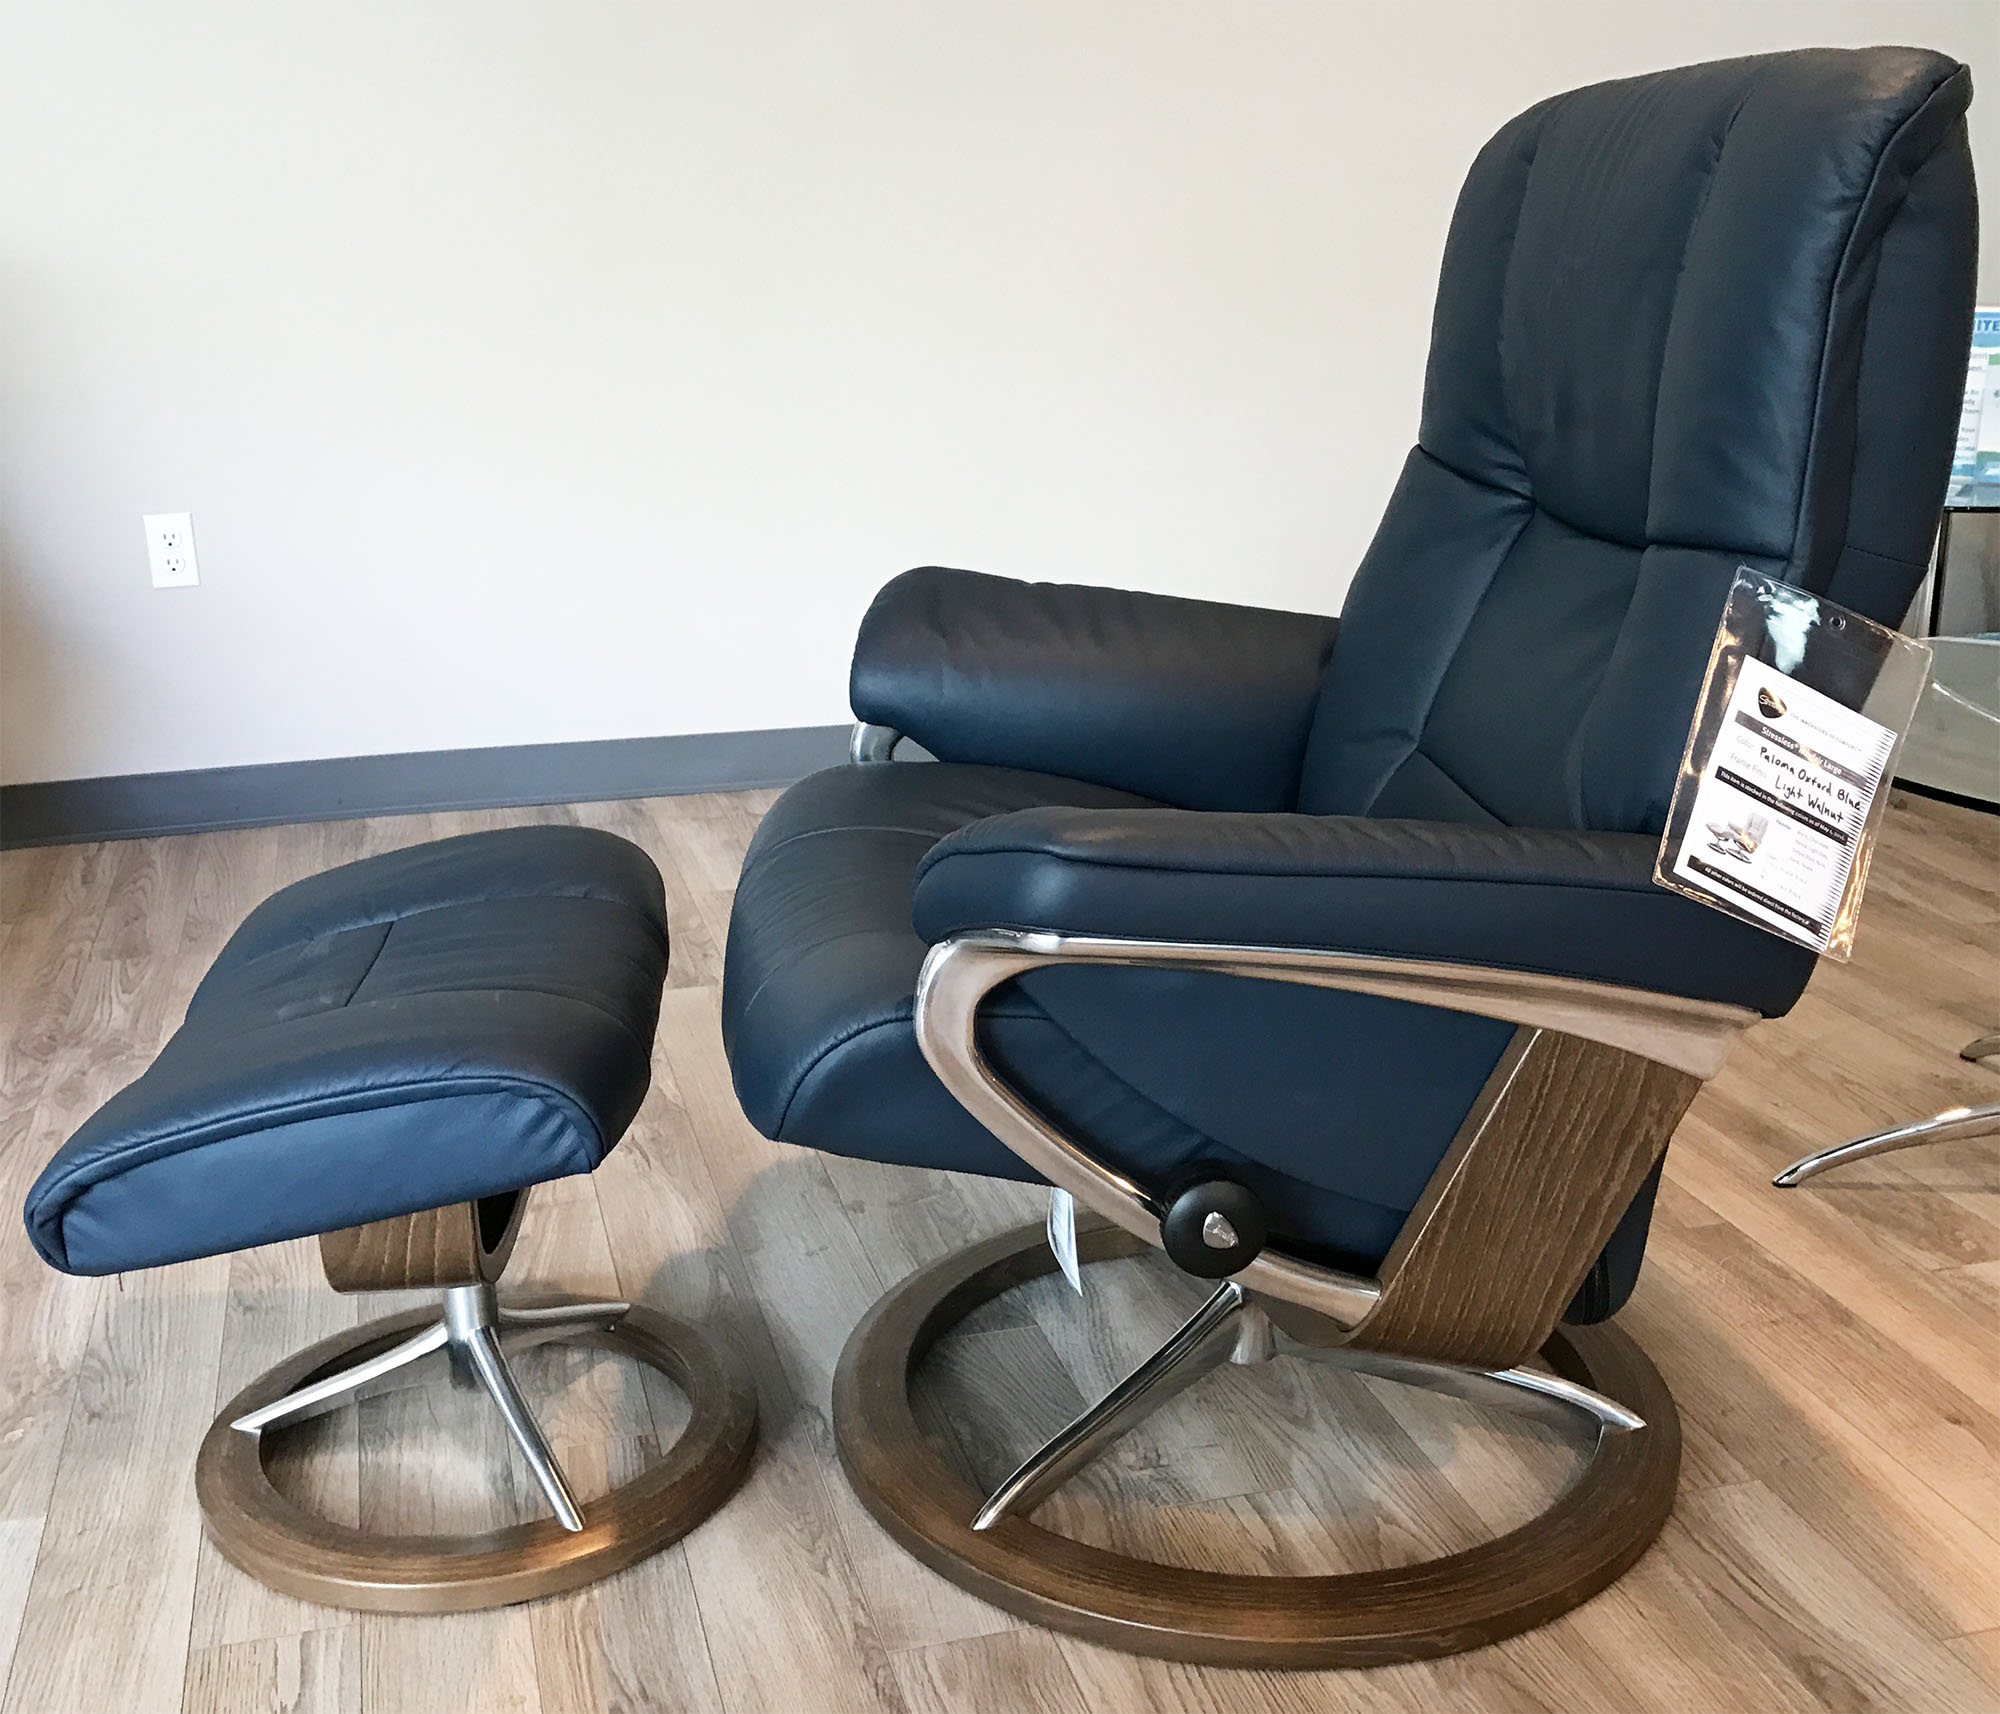 Stressless Mayfair Signature Walnut Wood Paloma Oxford Blue Leather  Recliner Chair and Ottoman by Ekornes